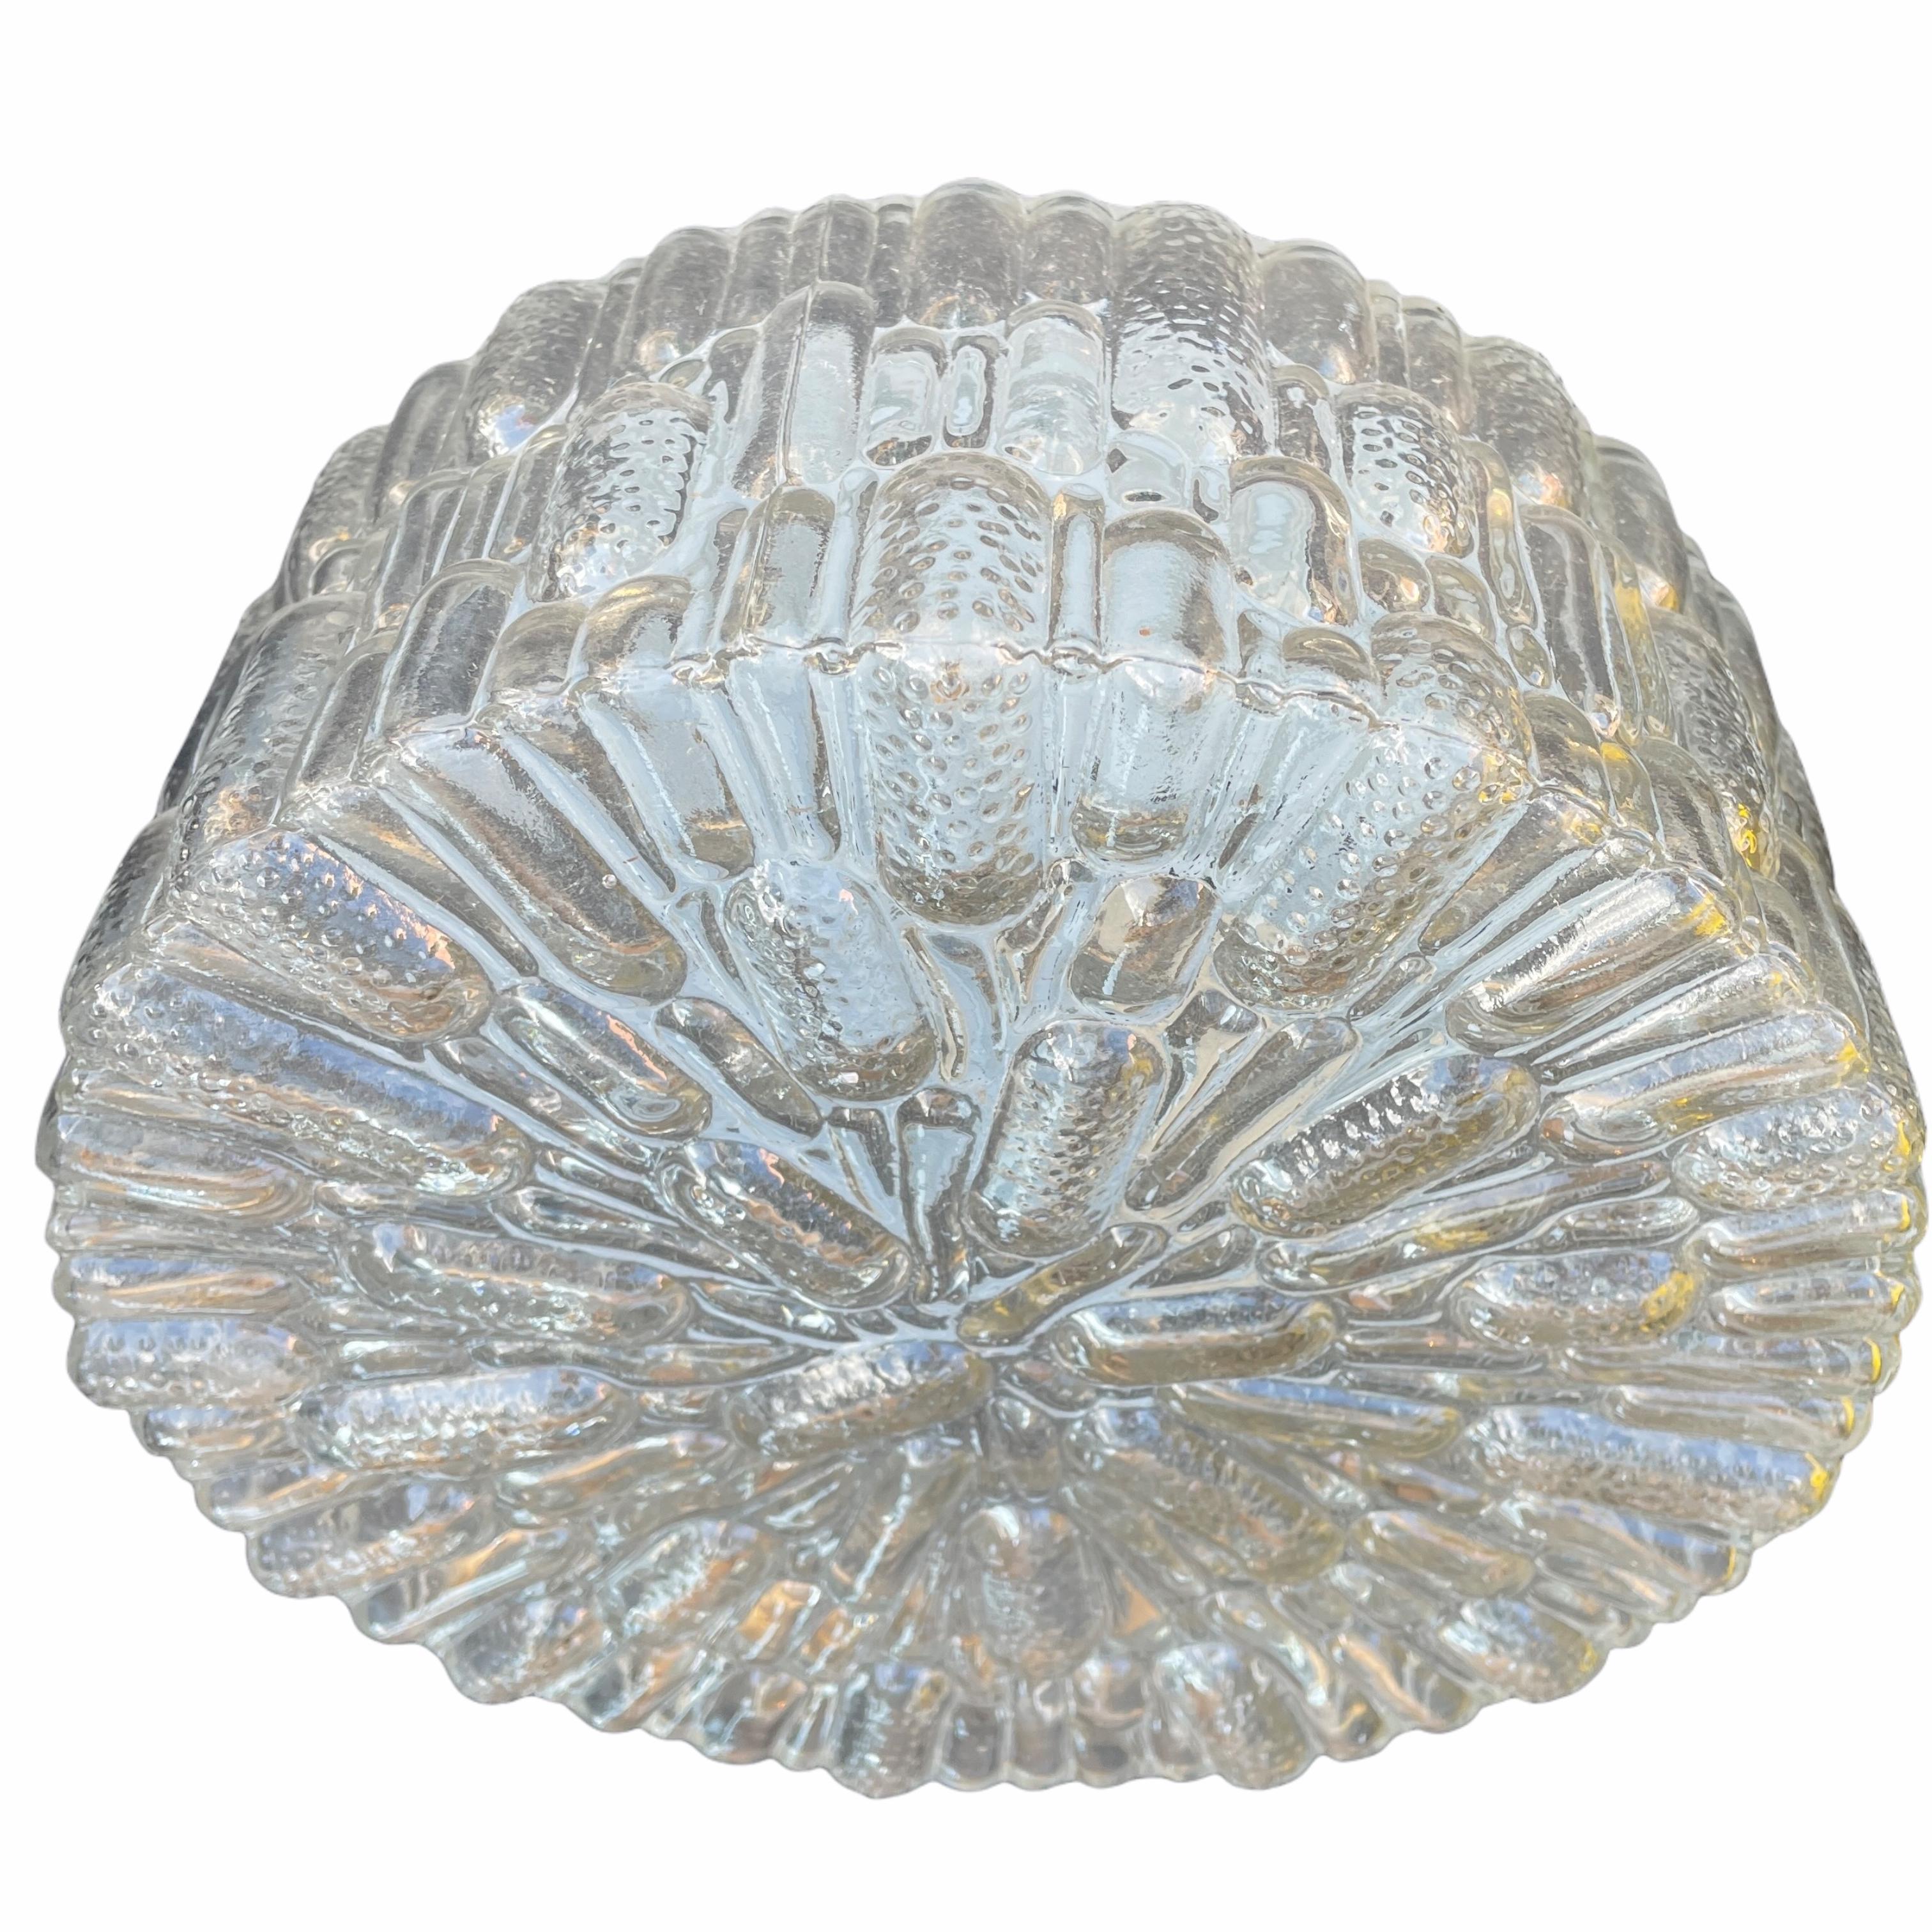 Beautiful bubble glass pattern flush mount. Made in Germany, attributed to Glashütte Limburg. Gorgeous textured glass flush mount with metal fixture. The fixture requires one European E27 Edison or Medium bulb up to 60 watts.